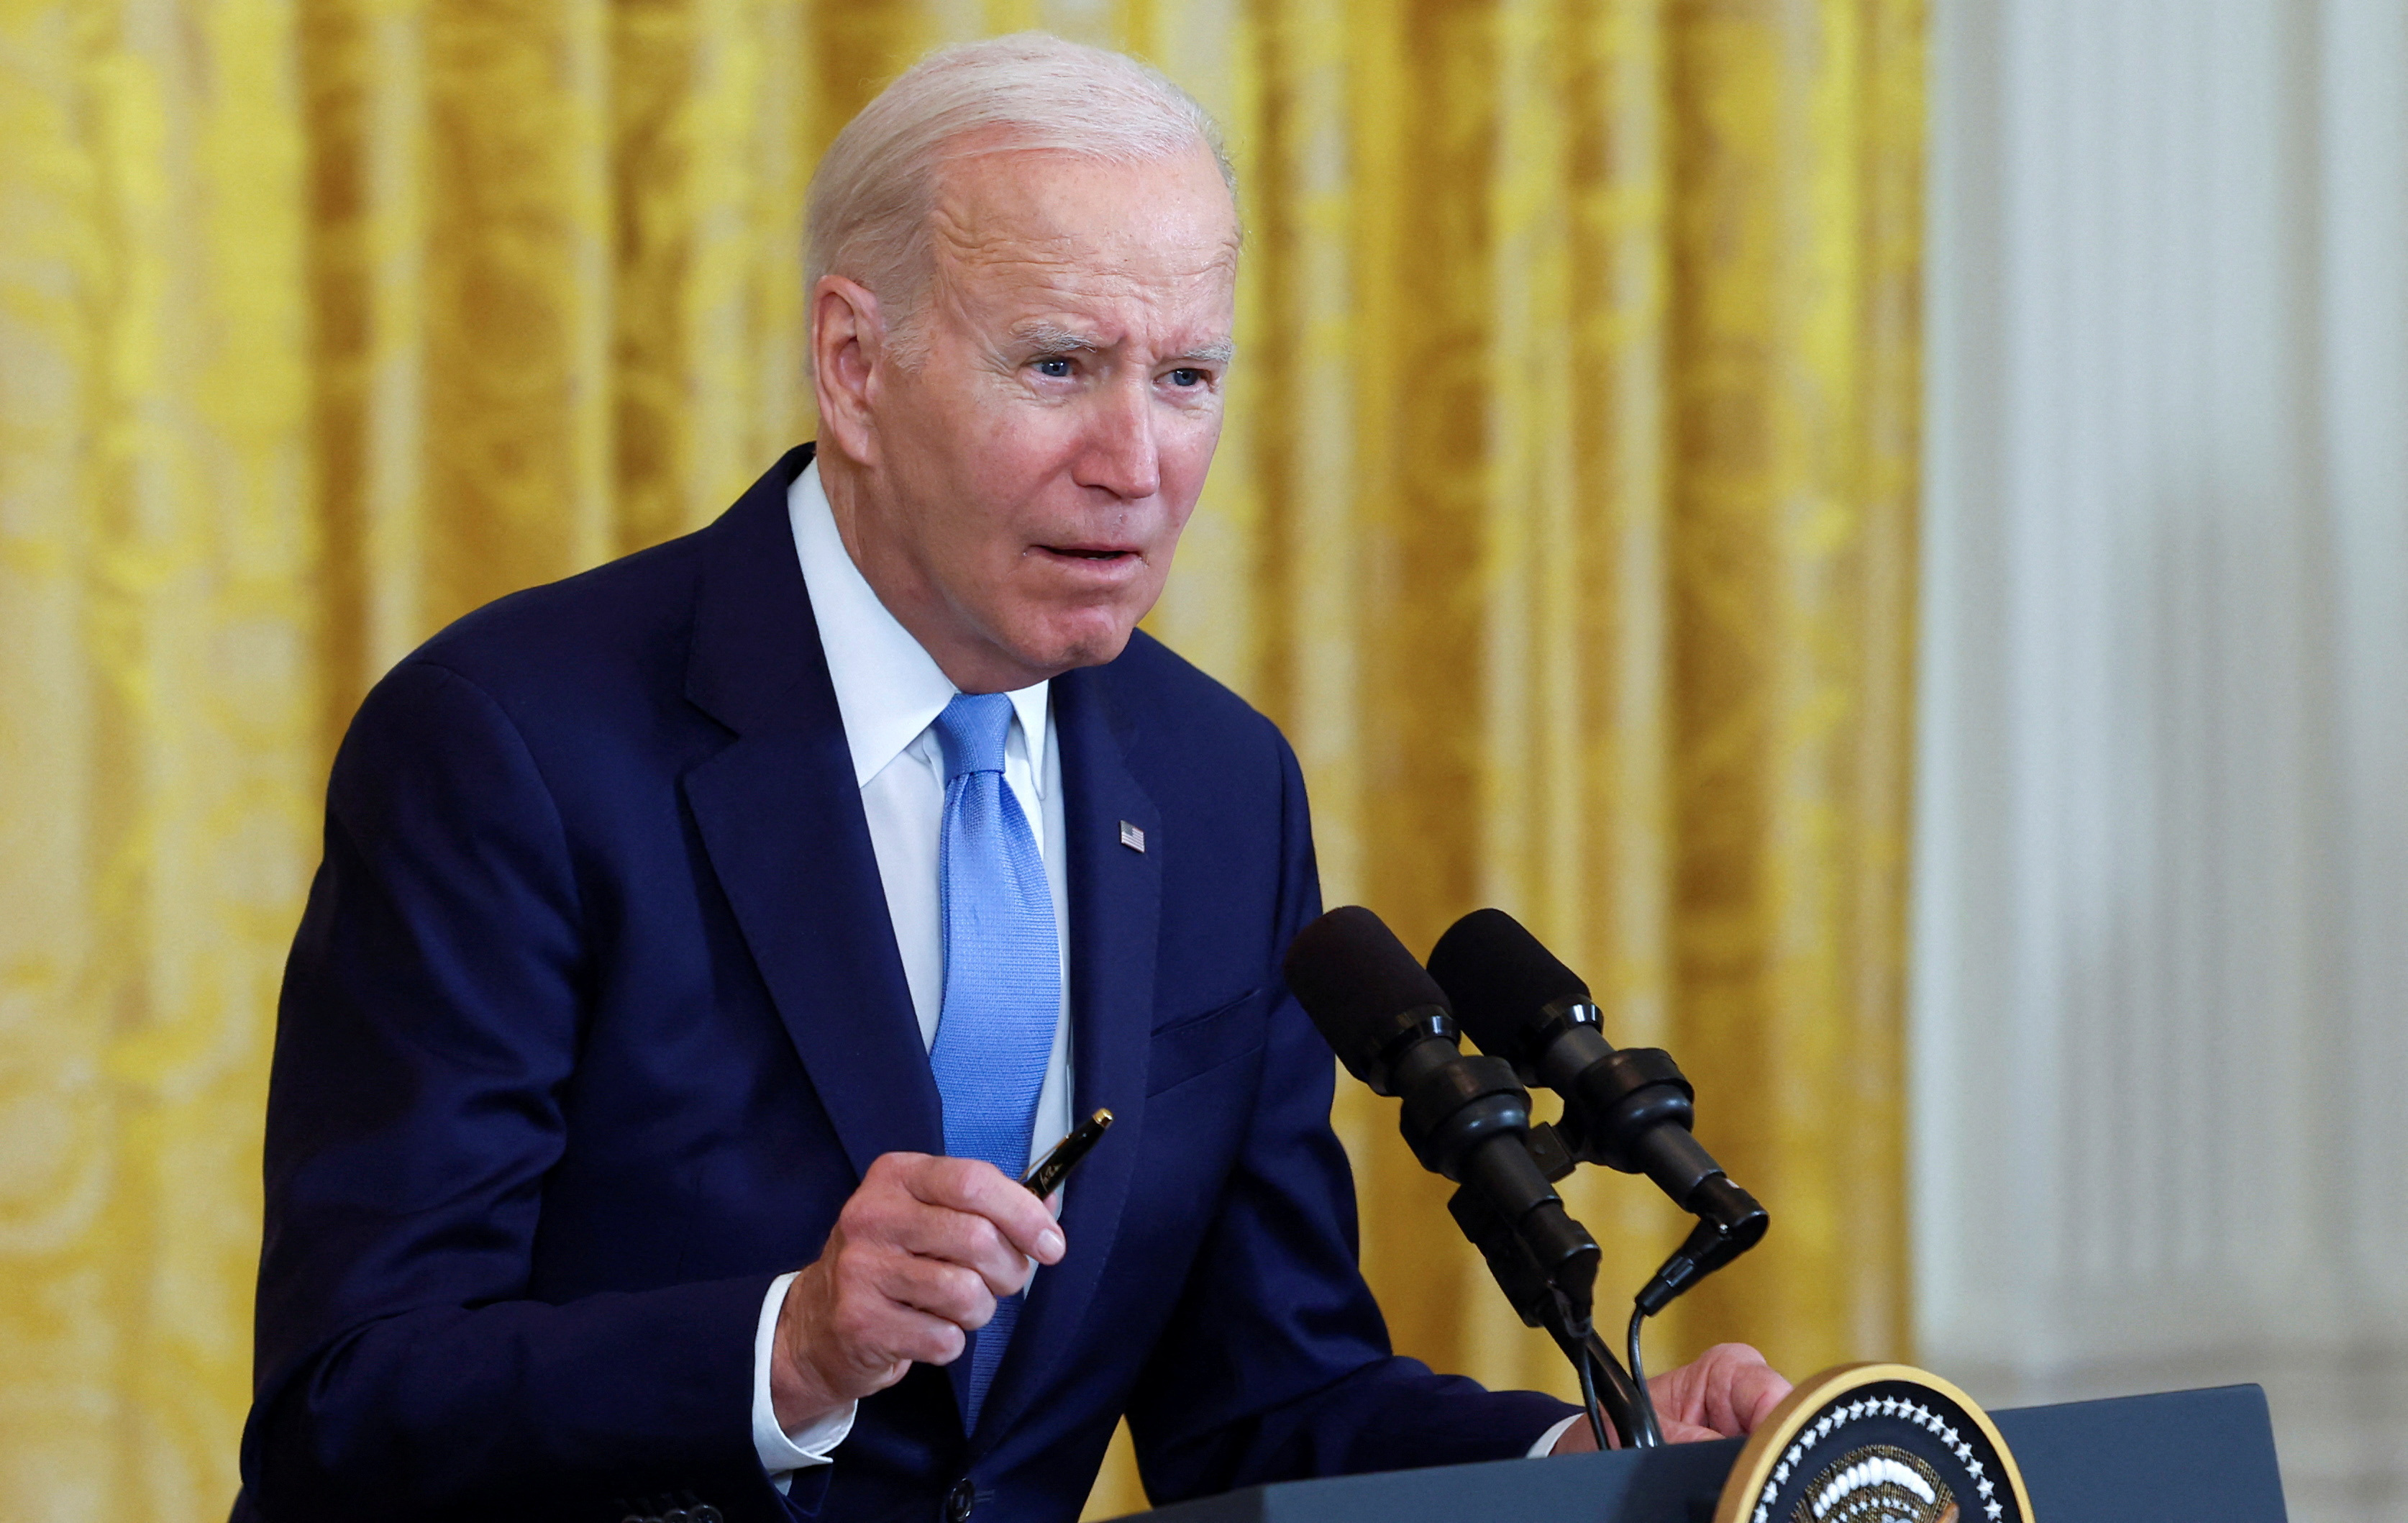 U.S. President Biden and British Prime Minister Sunak hold joint news conference at the White House in Washington